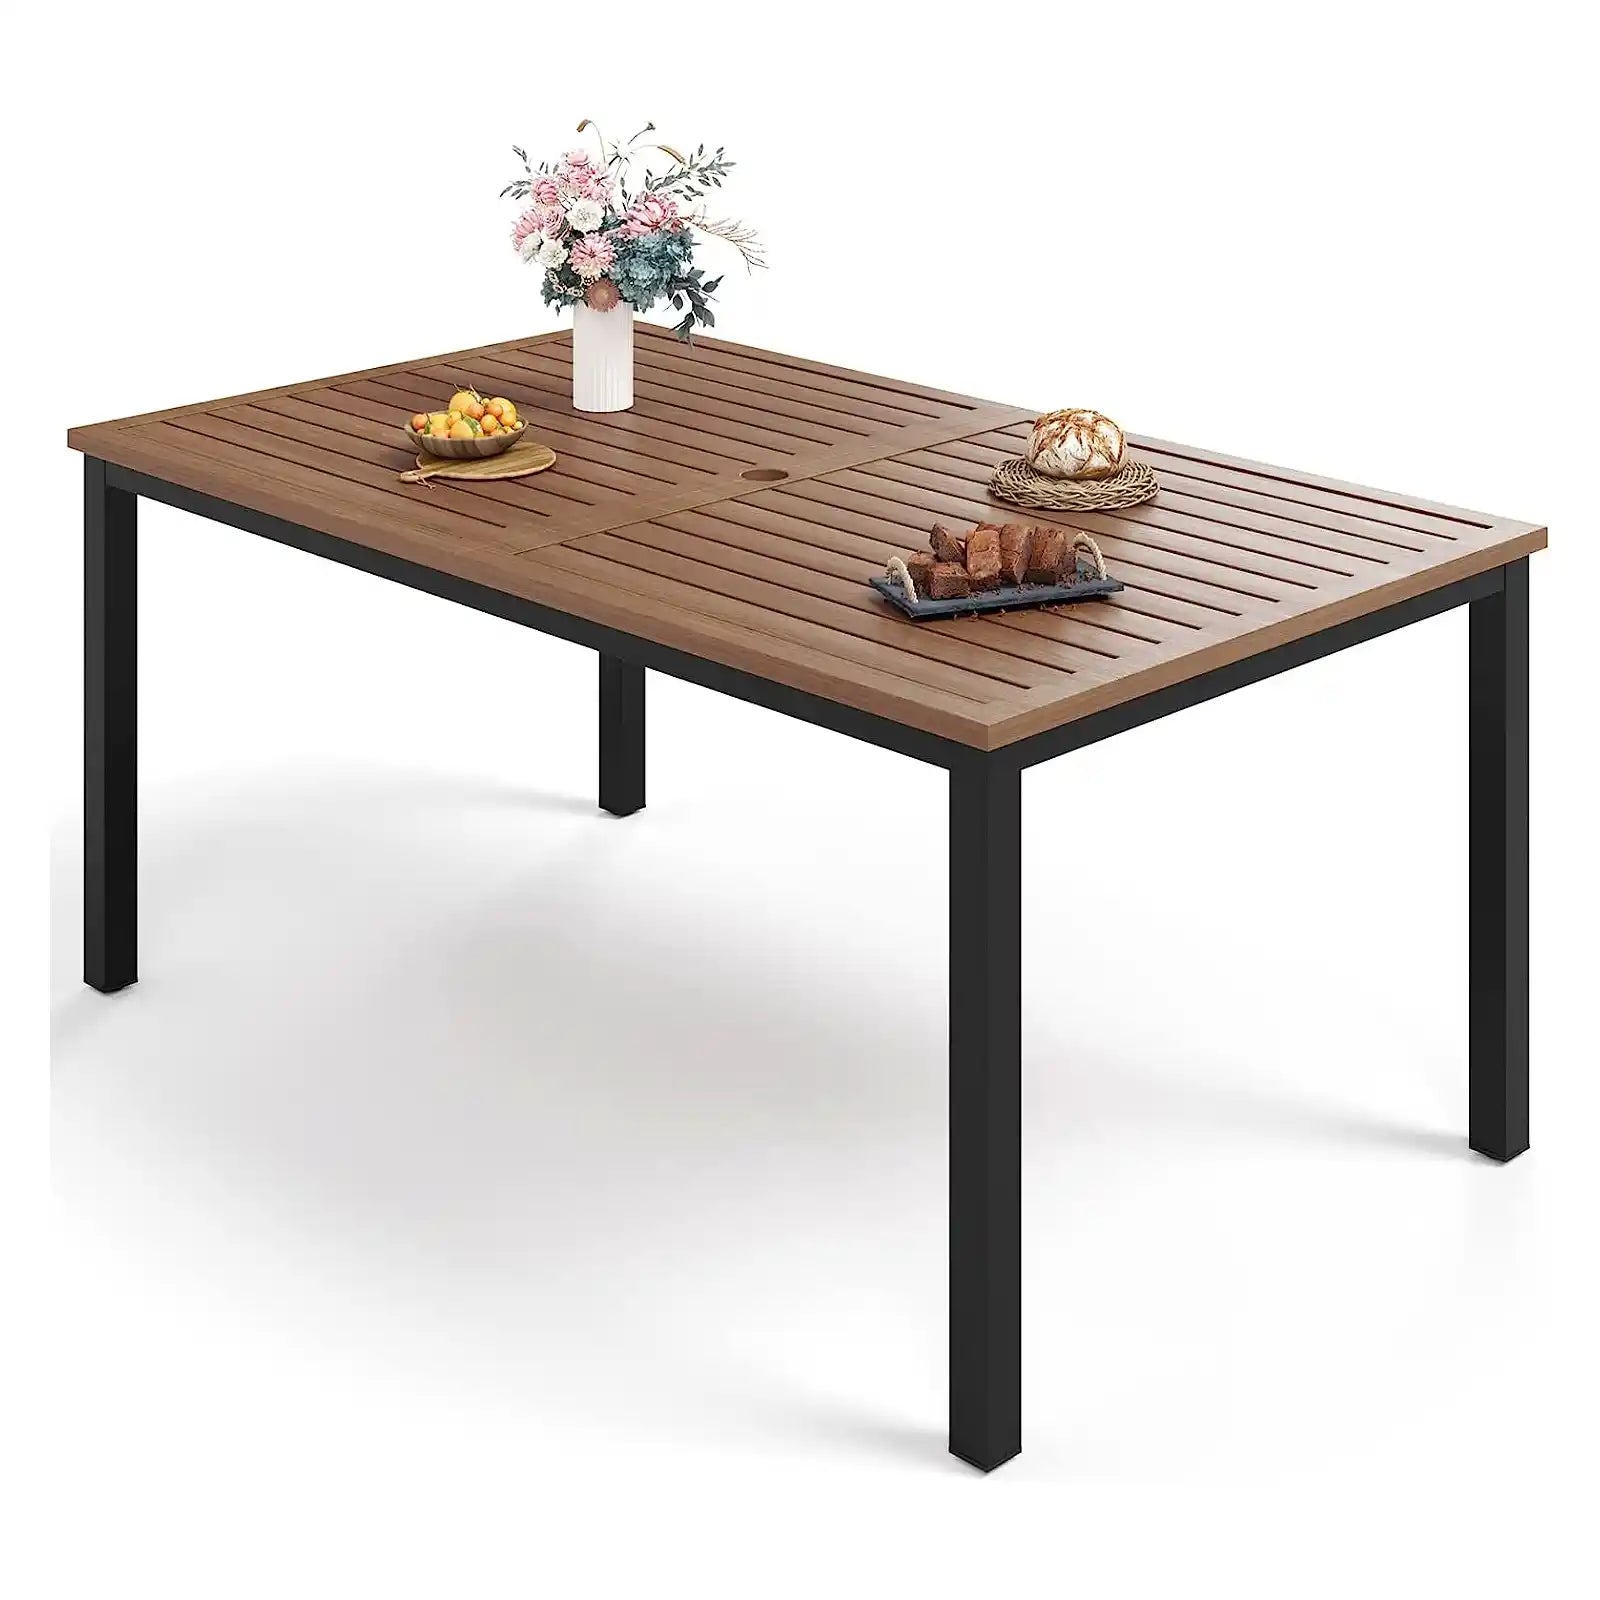 Metal Rectangular Outdoor Dining Table for 6 Person